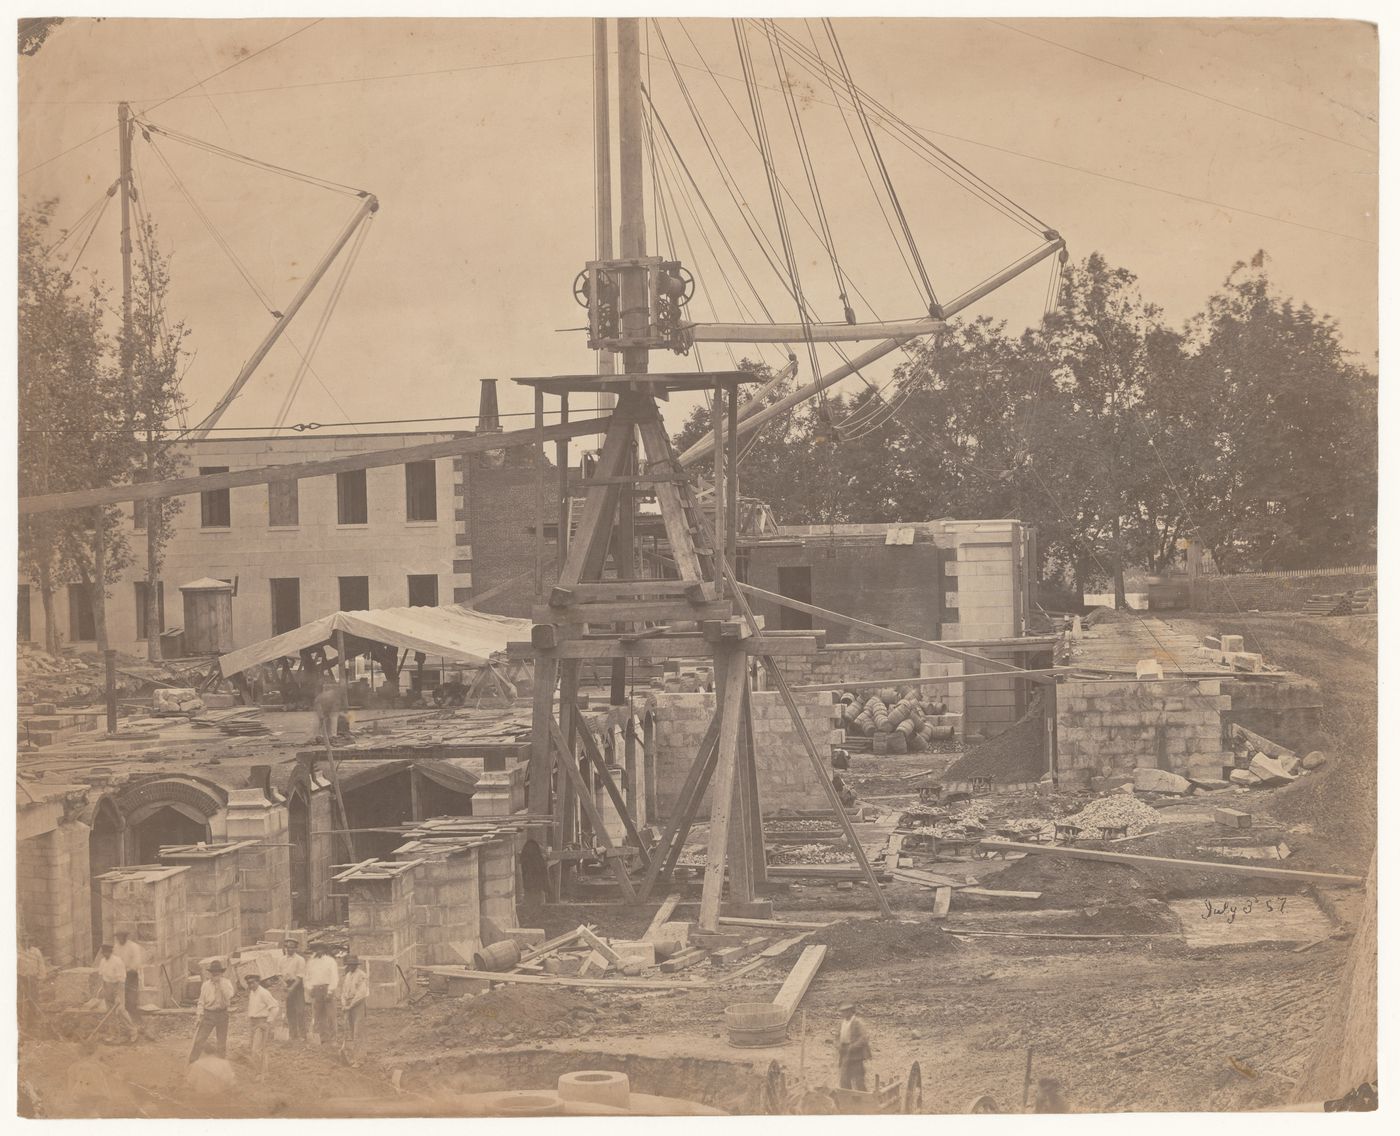 Excavation and commencement of construction of Treasury extension basement: view of derrick, with workers in foreground, Washington, District of Columbia